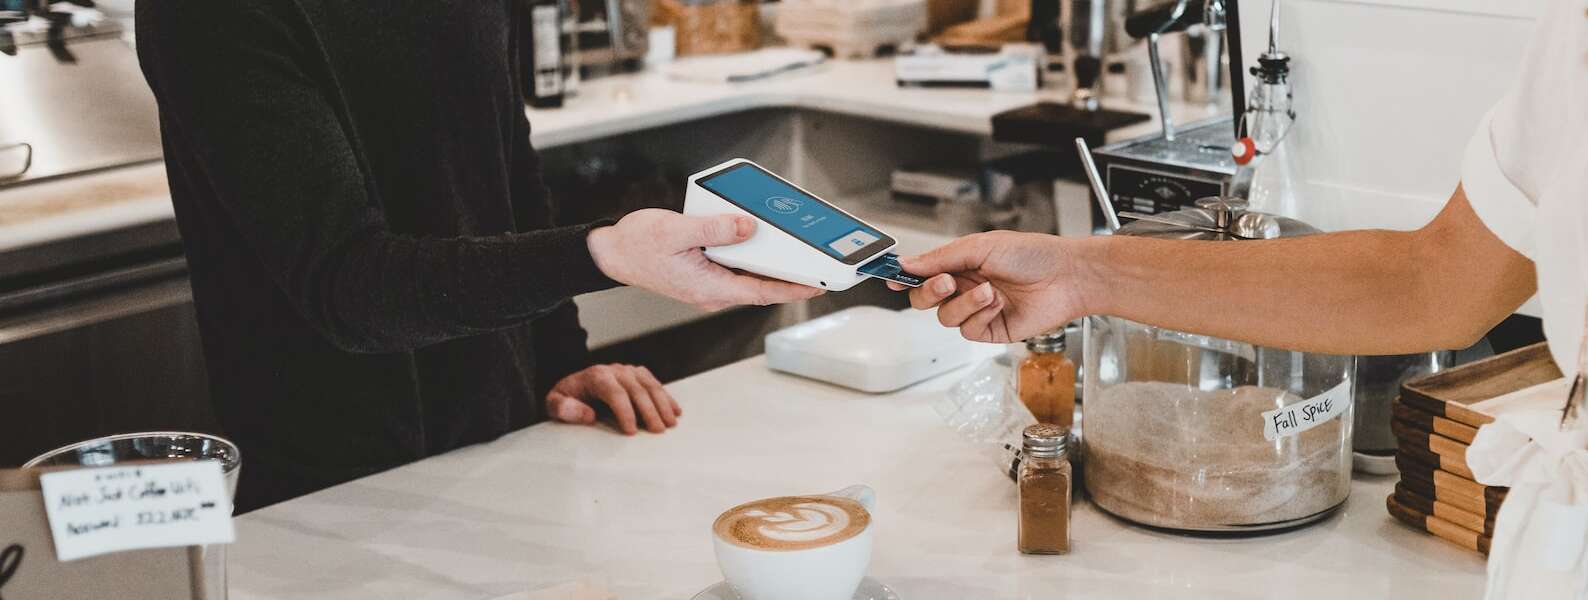 A person pays with a credit card at a coffee shop